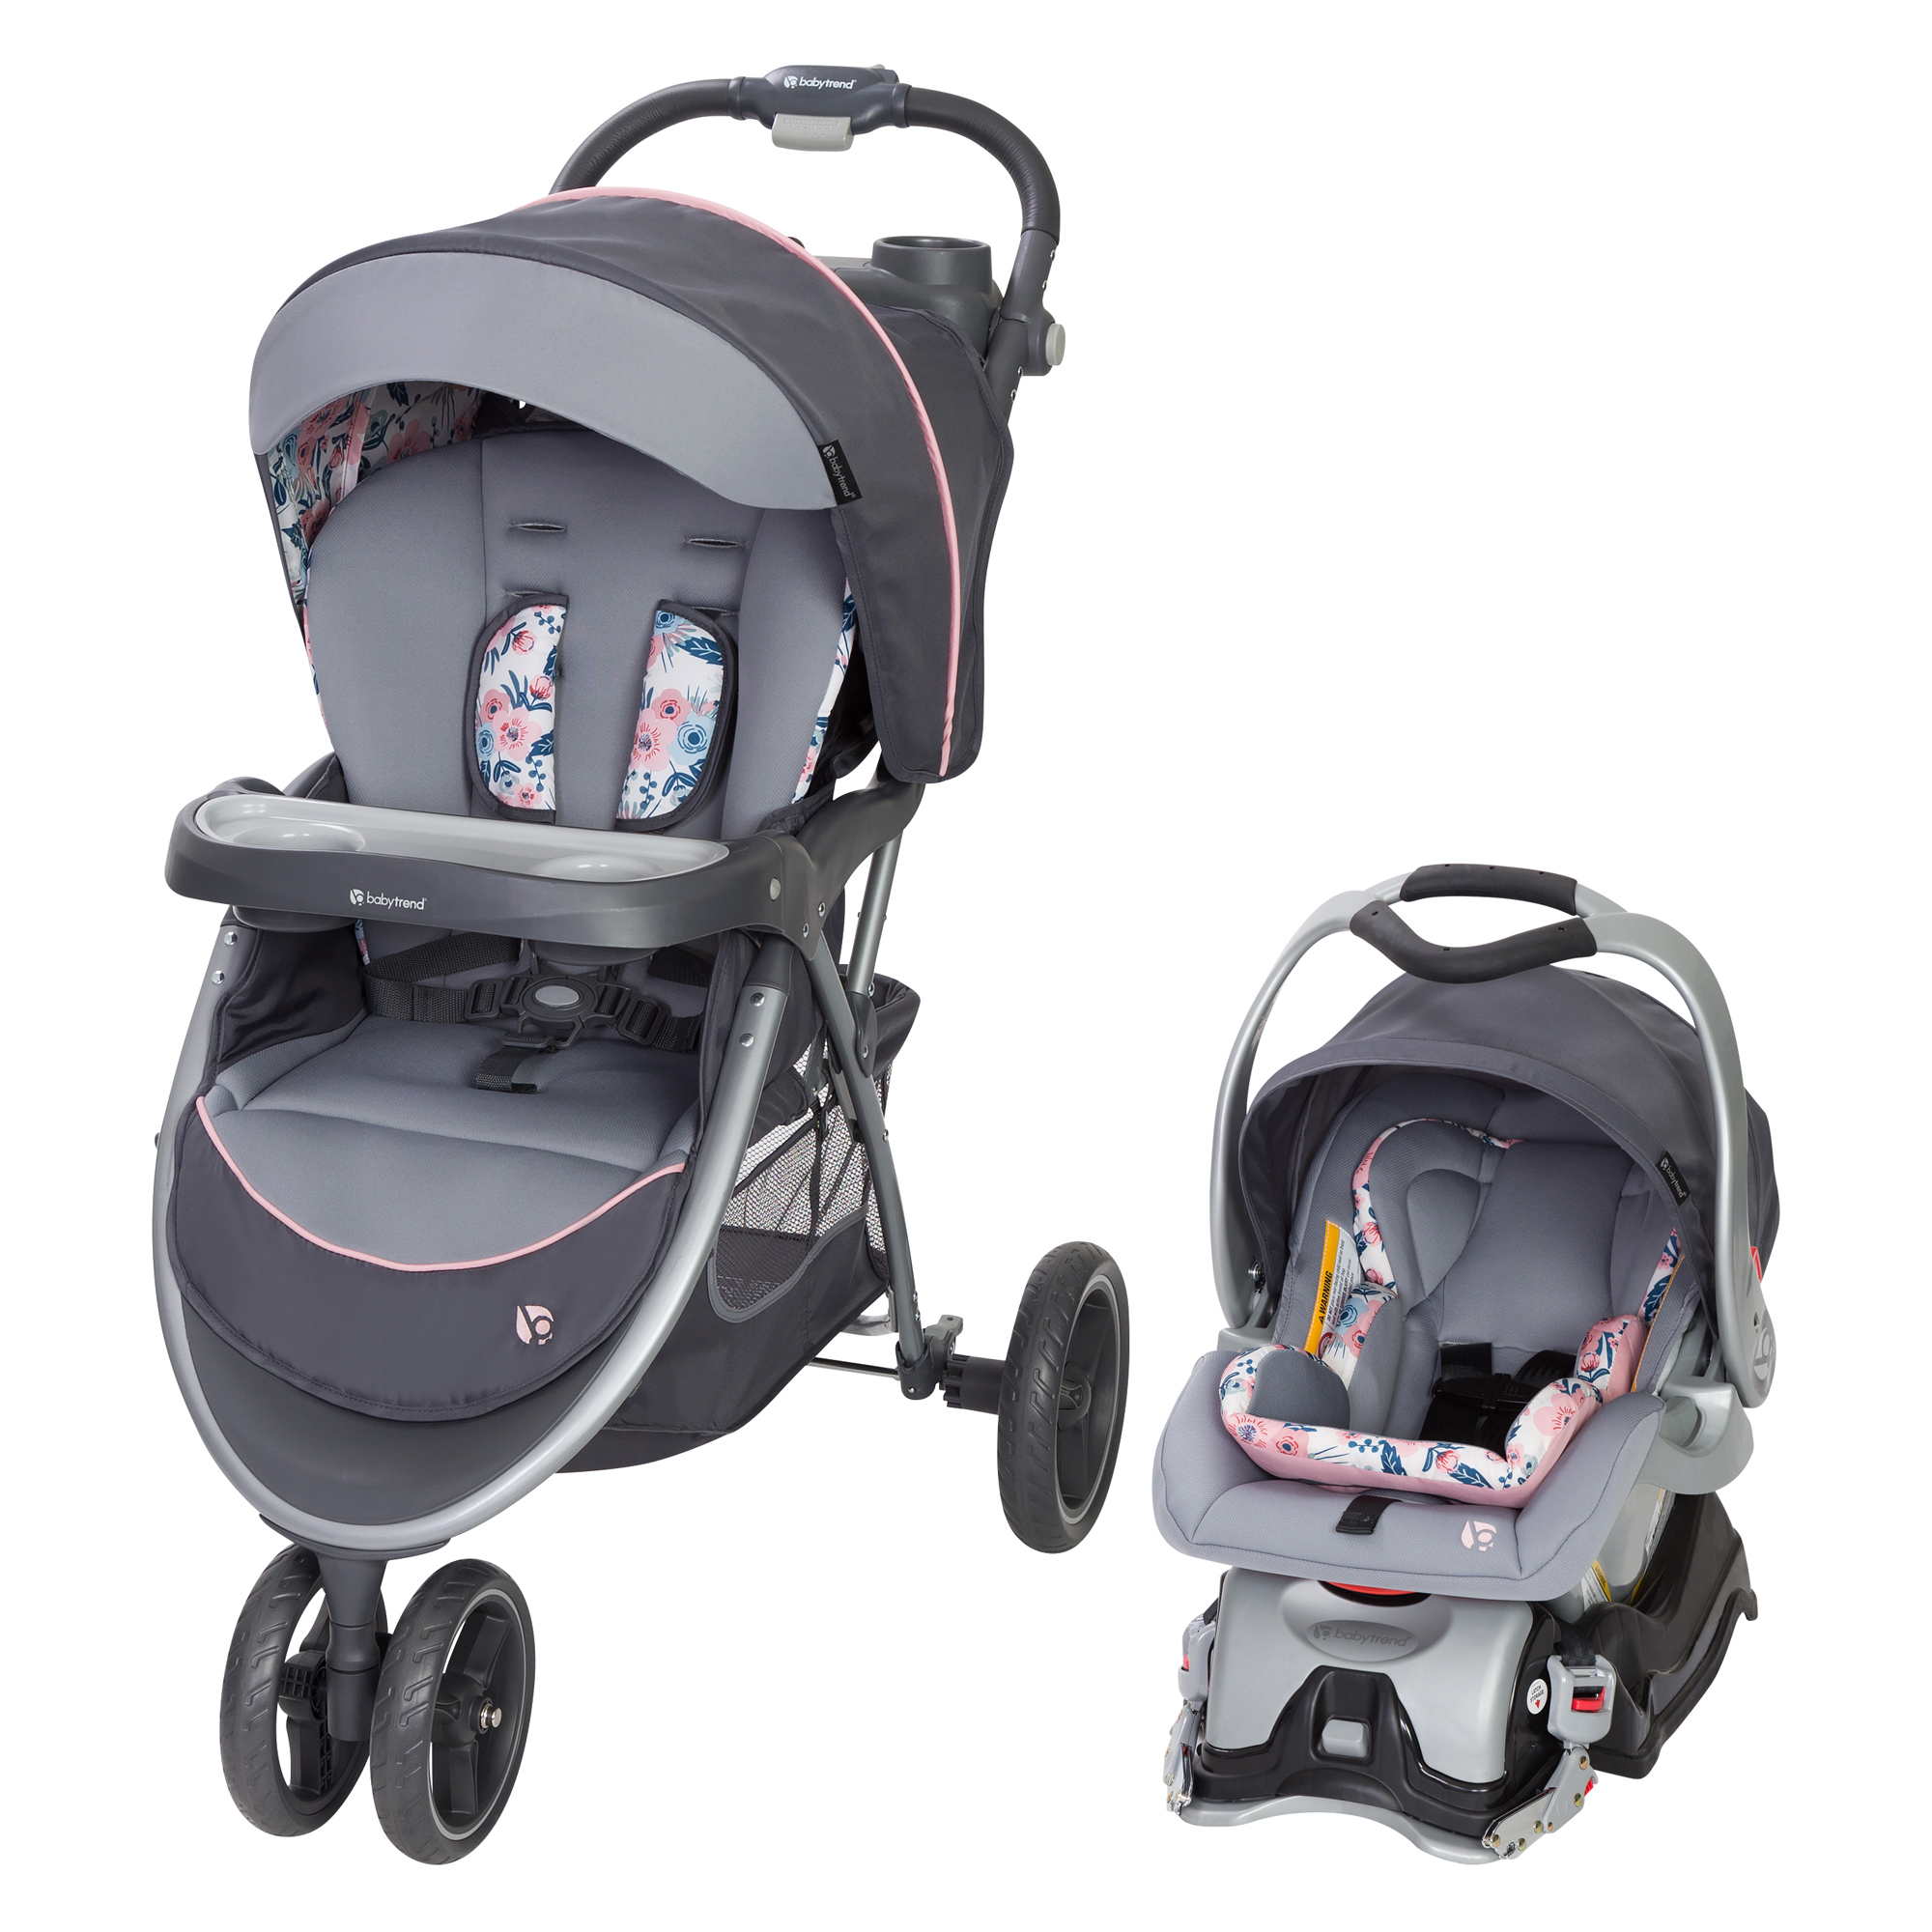 Baby Trend Skyview Plus Travel System - Bluebell - image 1 of 7